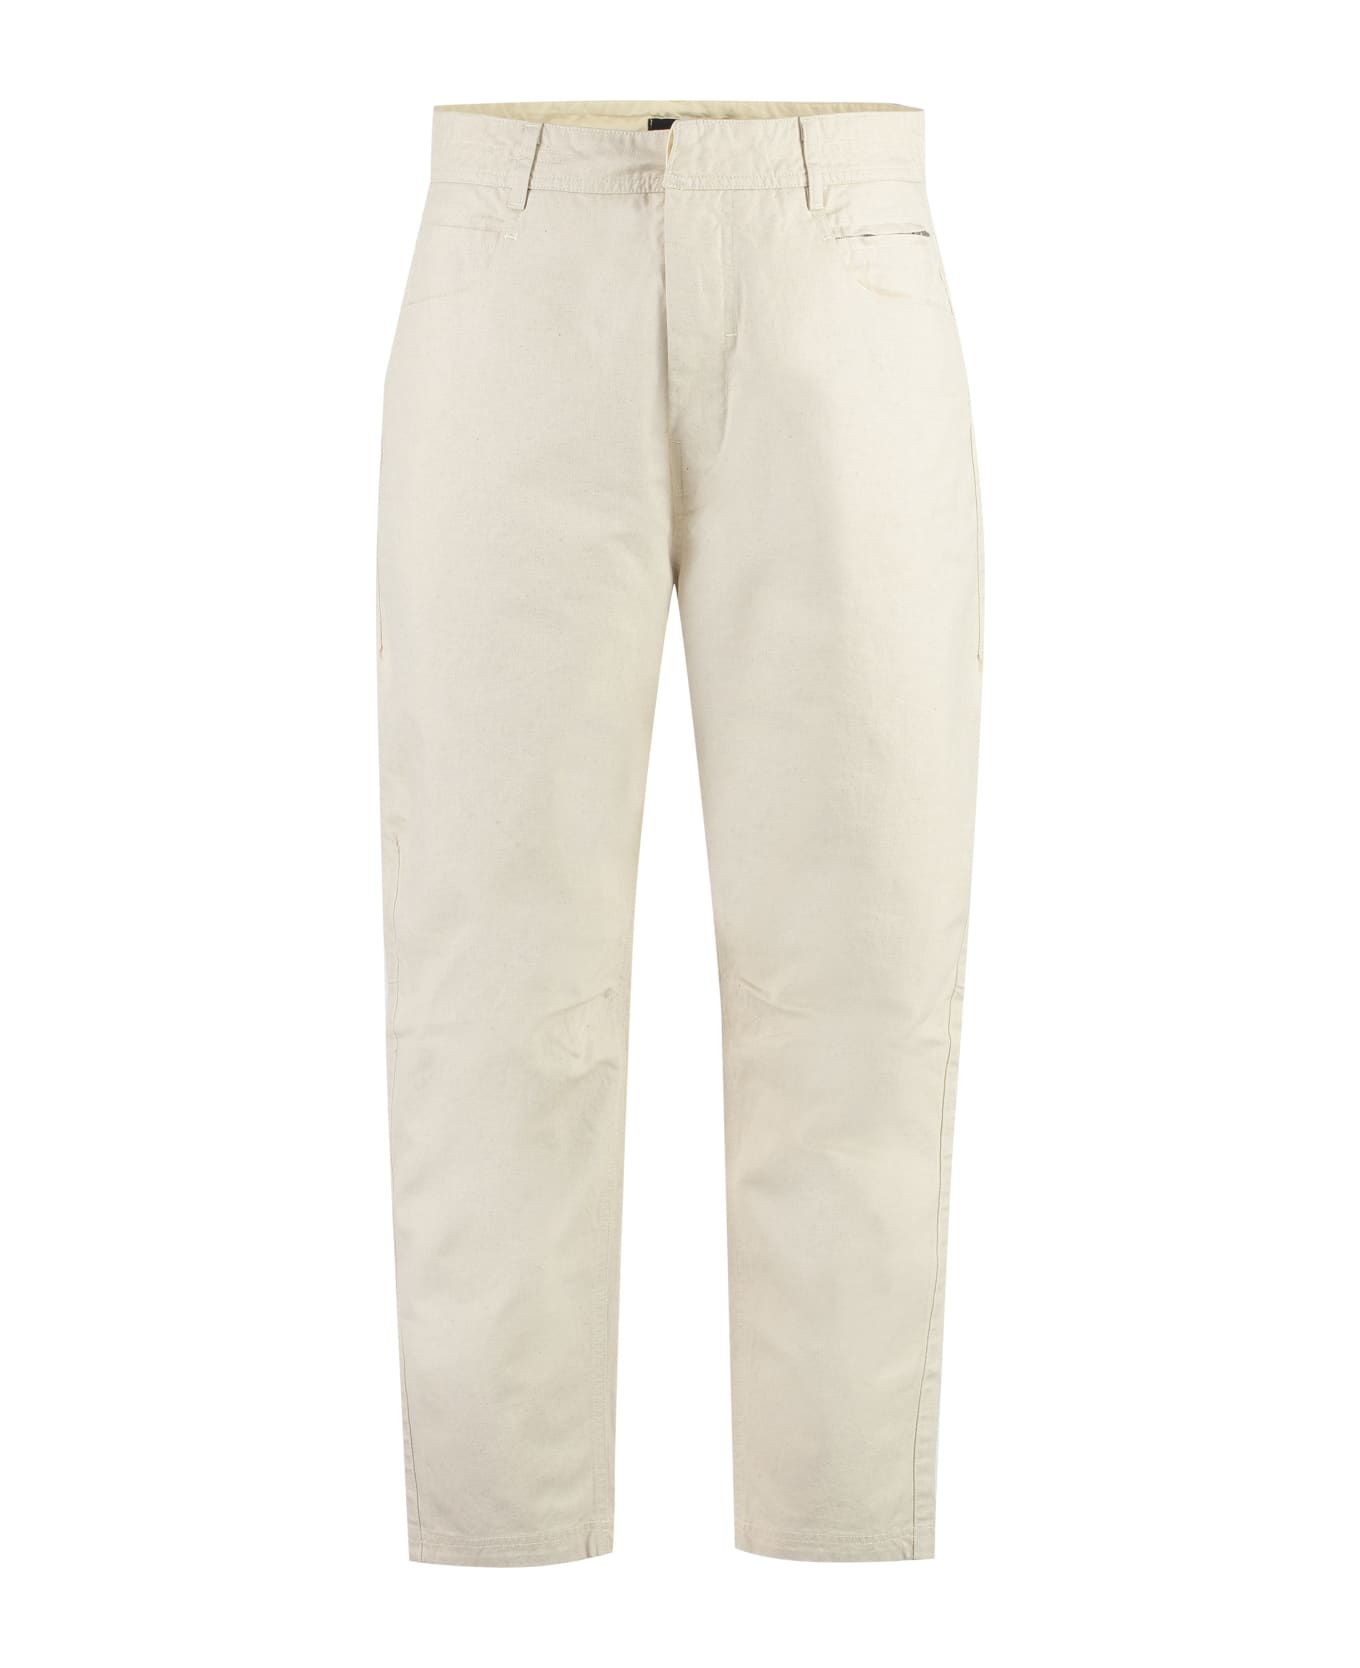 Stone Island Shadow Project Cotton Blend Trousers - Sand